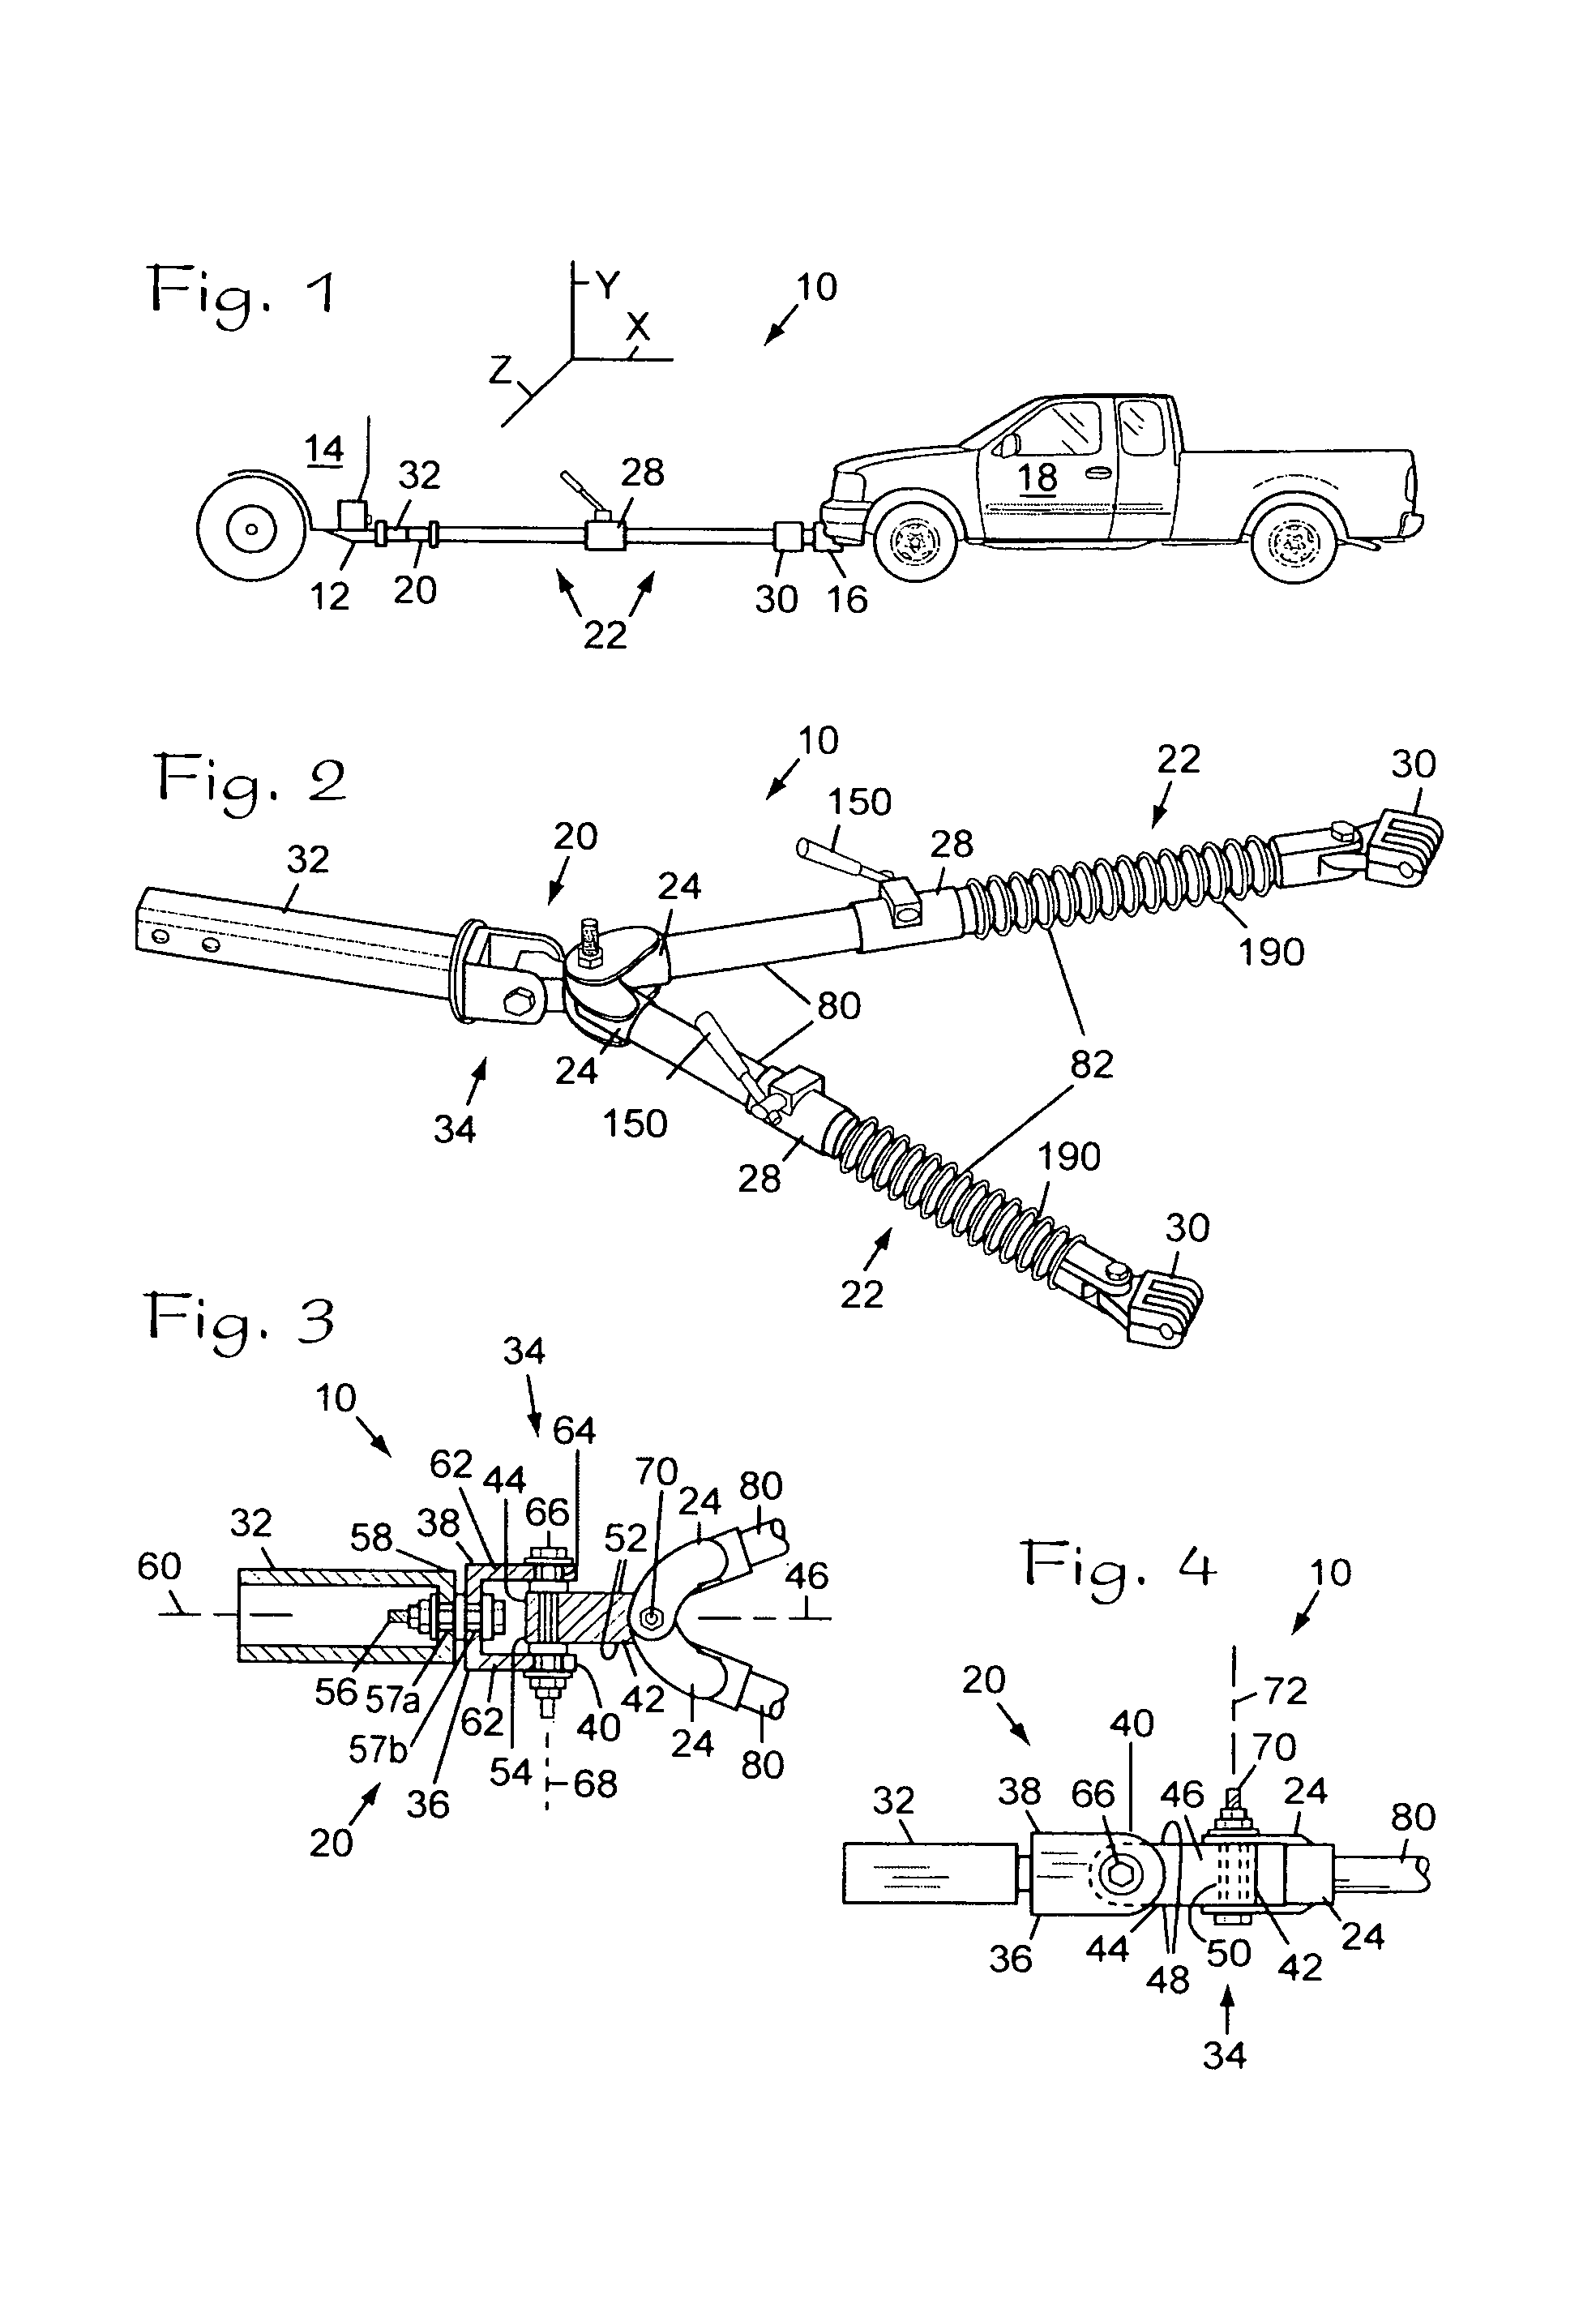 Light-weight tow bar for vehicles and leg lock therefor